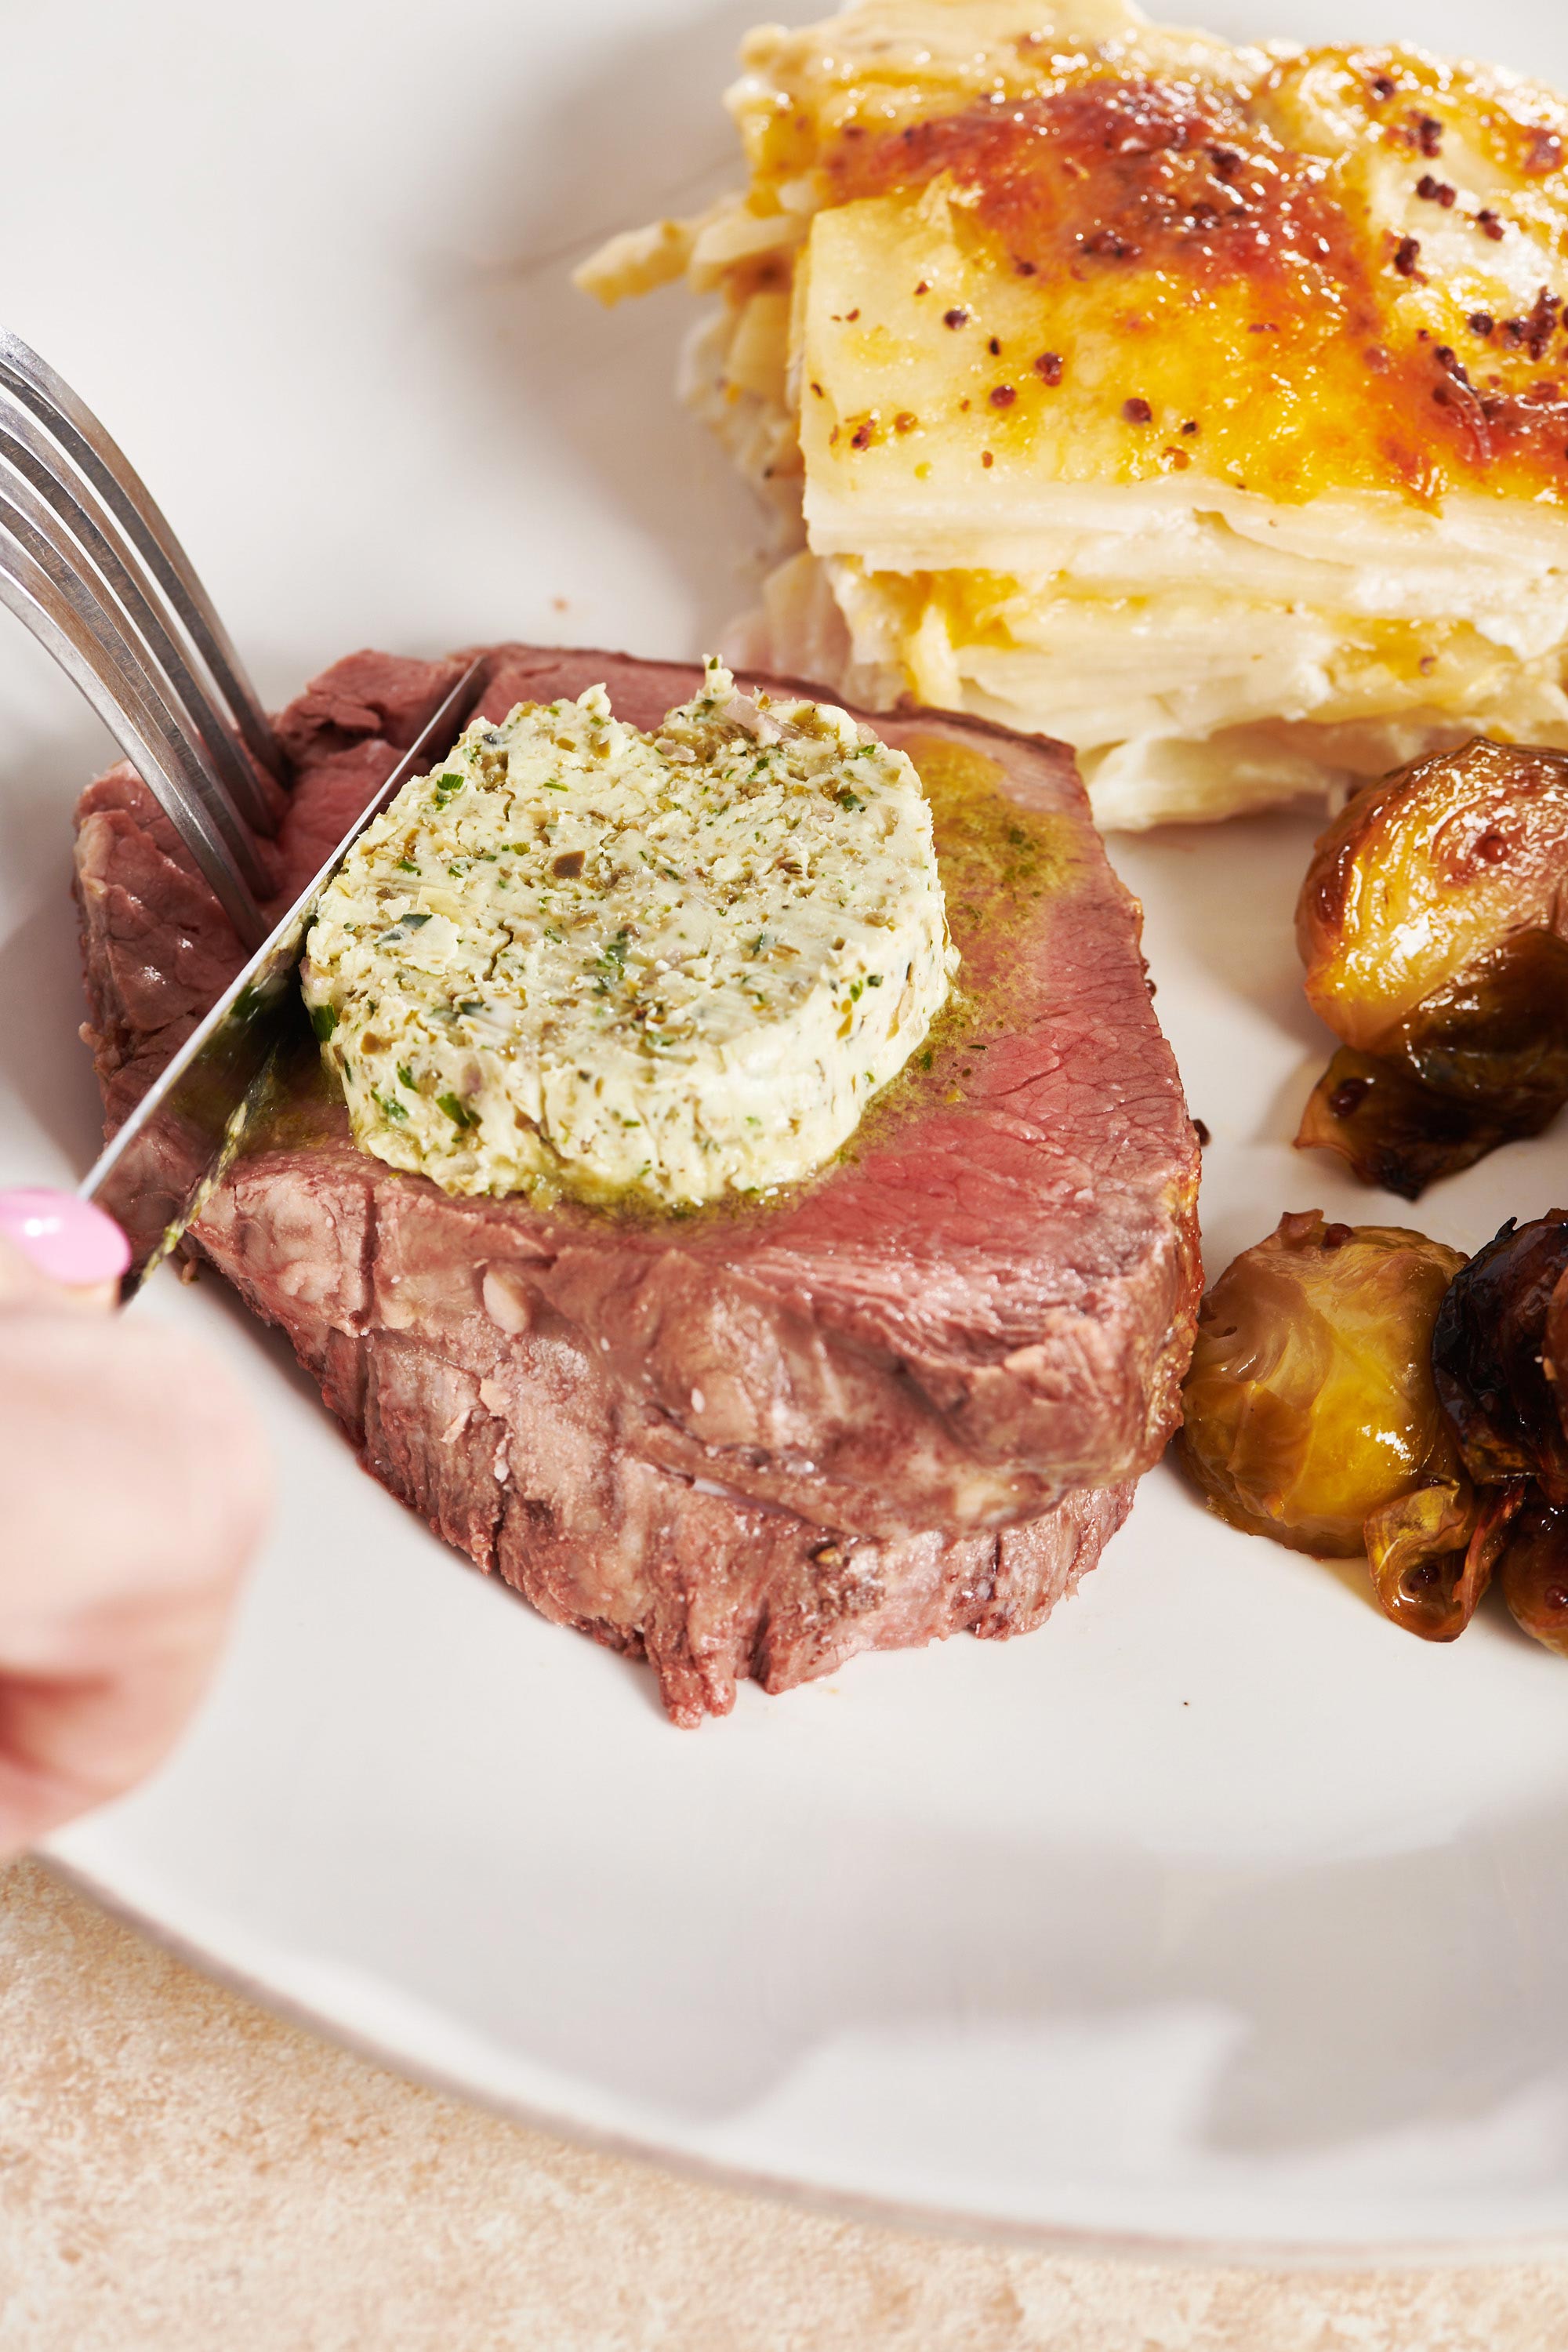 Cutting slice of Beef Tenderloin Roast with compound butter on plate.